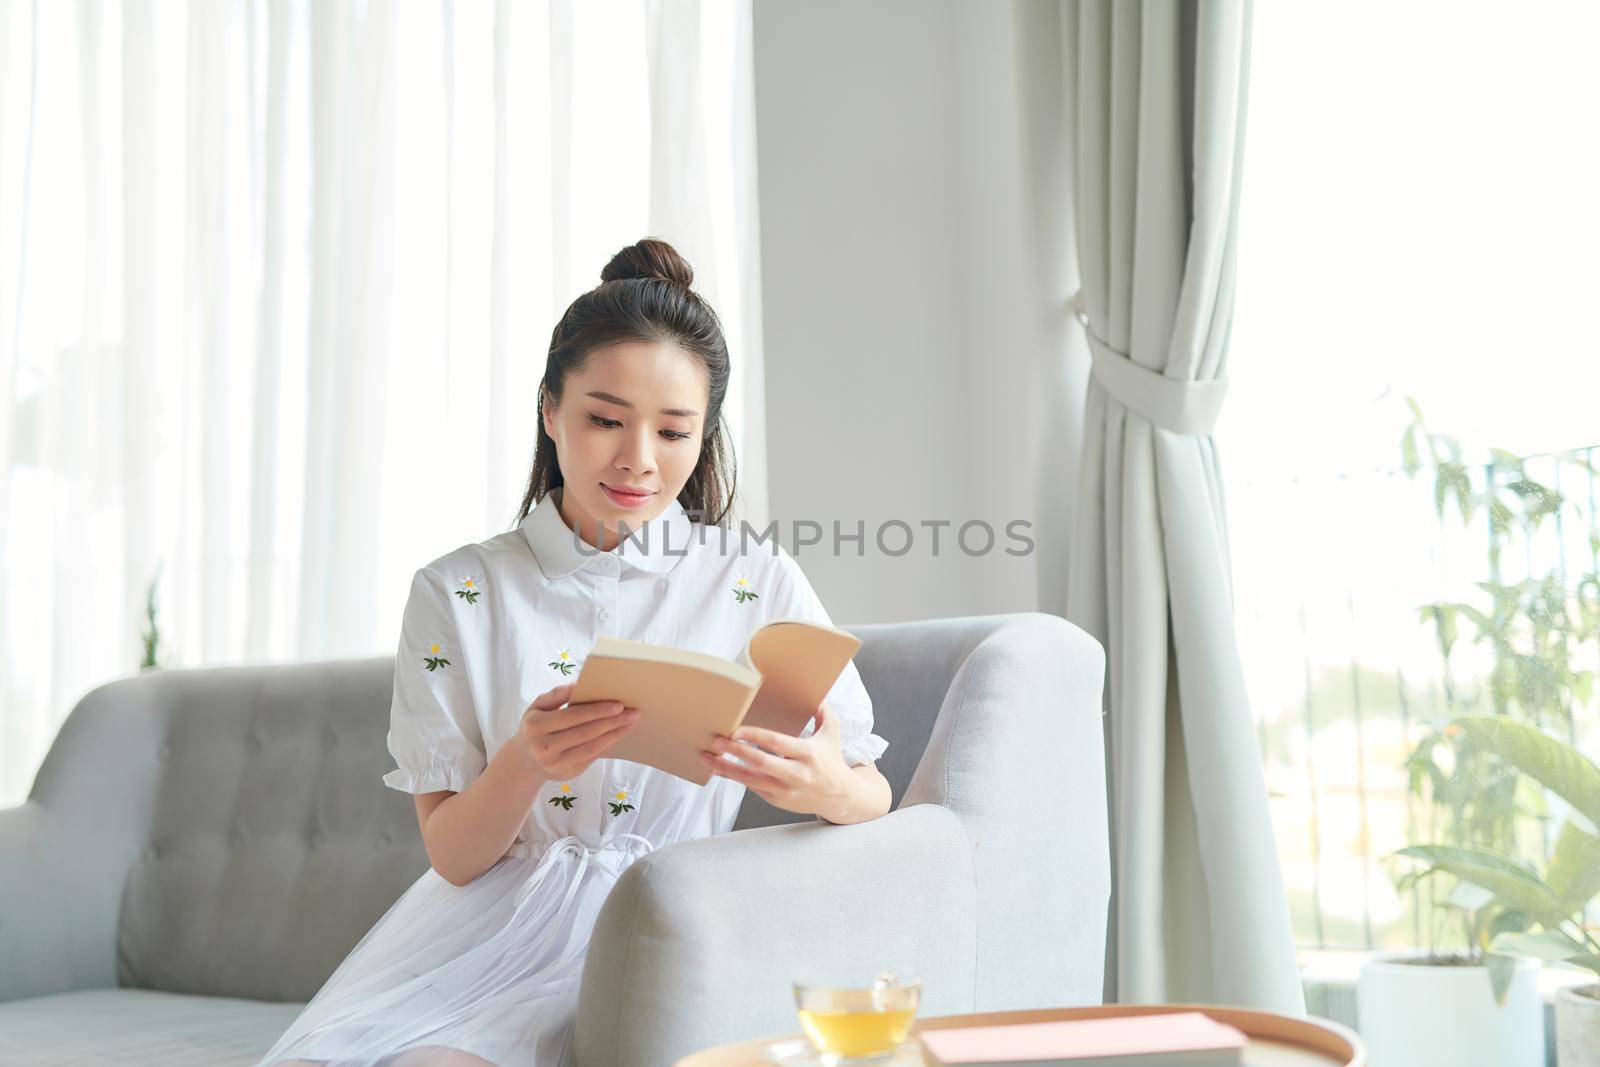 Girl reading an interesting book and smiling